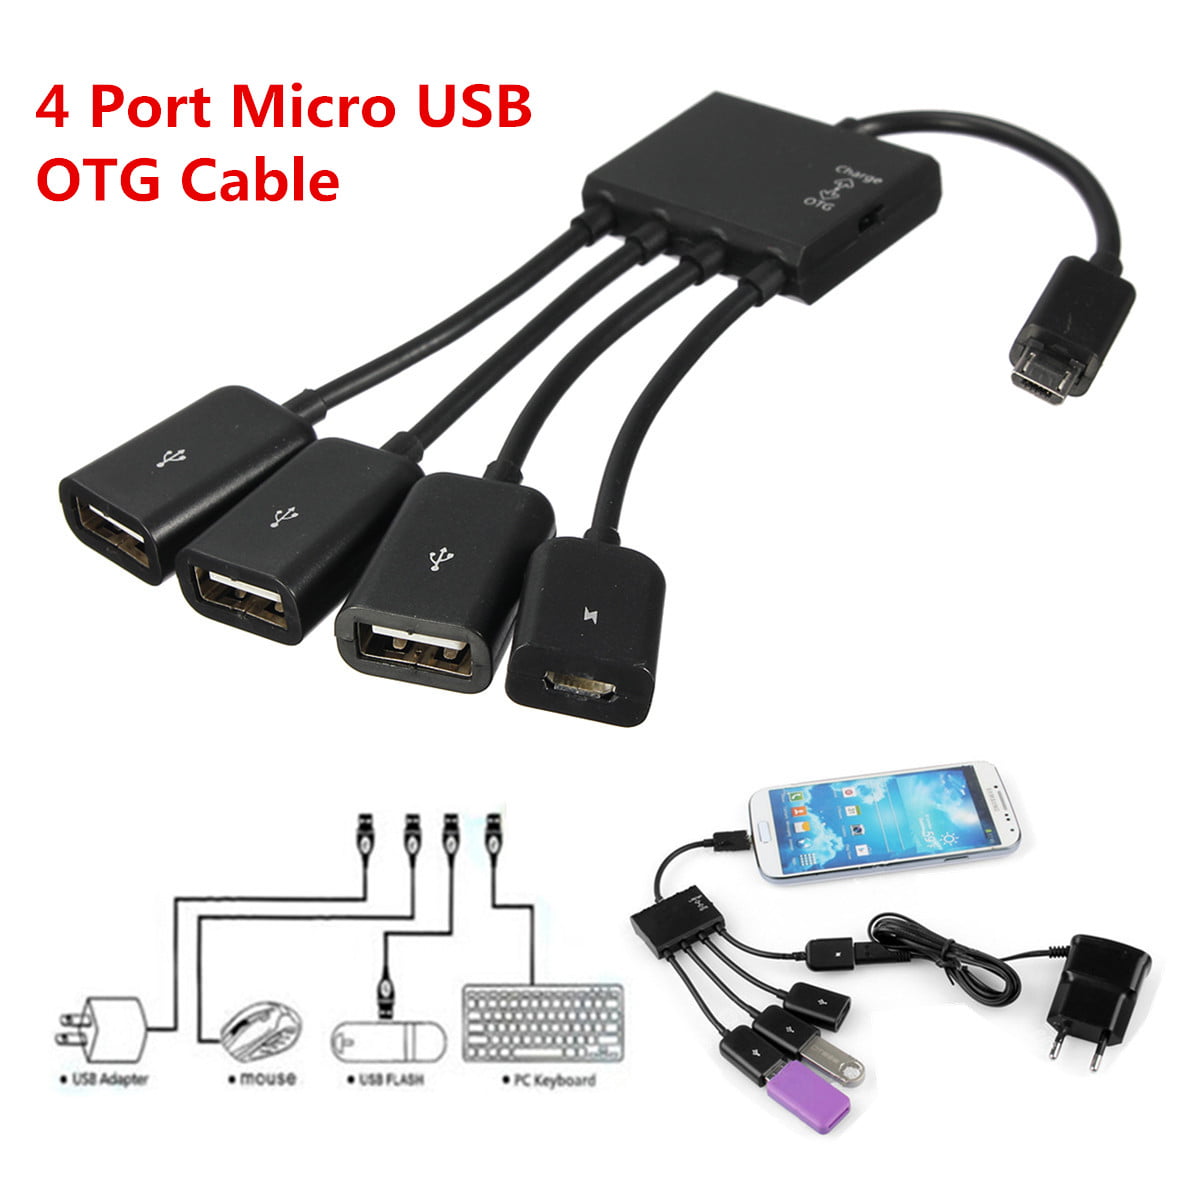 PRO OTG Power Cable Works for Nokia 5.1 with Power Connect to Any Compatible USB Accessory with MicroUSB 